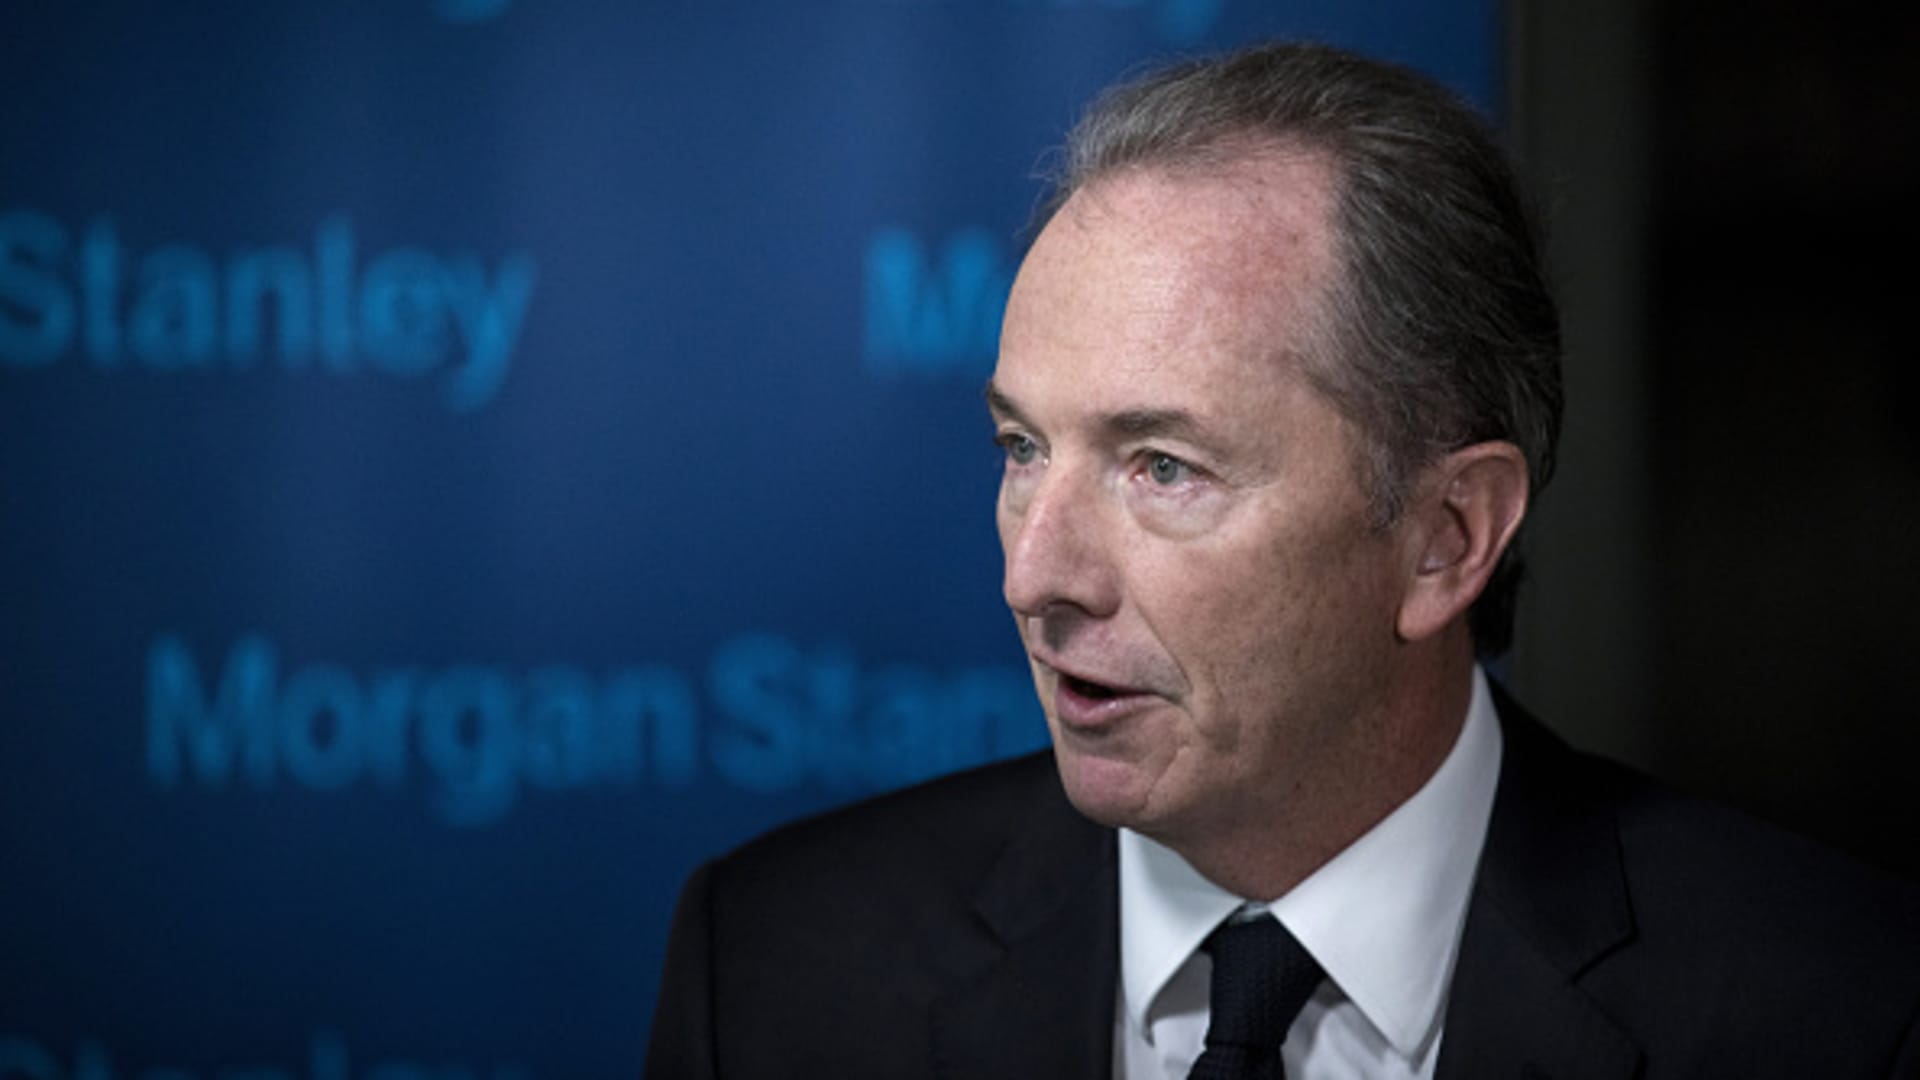 Morgan Stanley is set to report second-quarter earnings —here’s what the Street expects